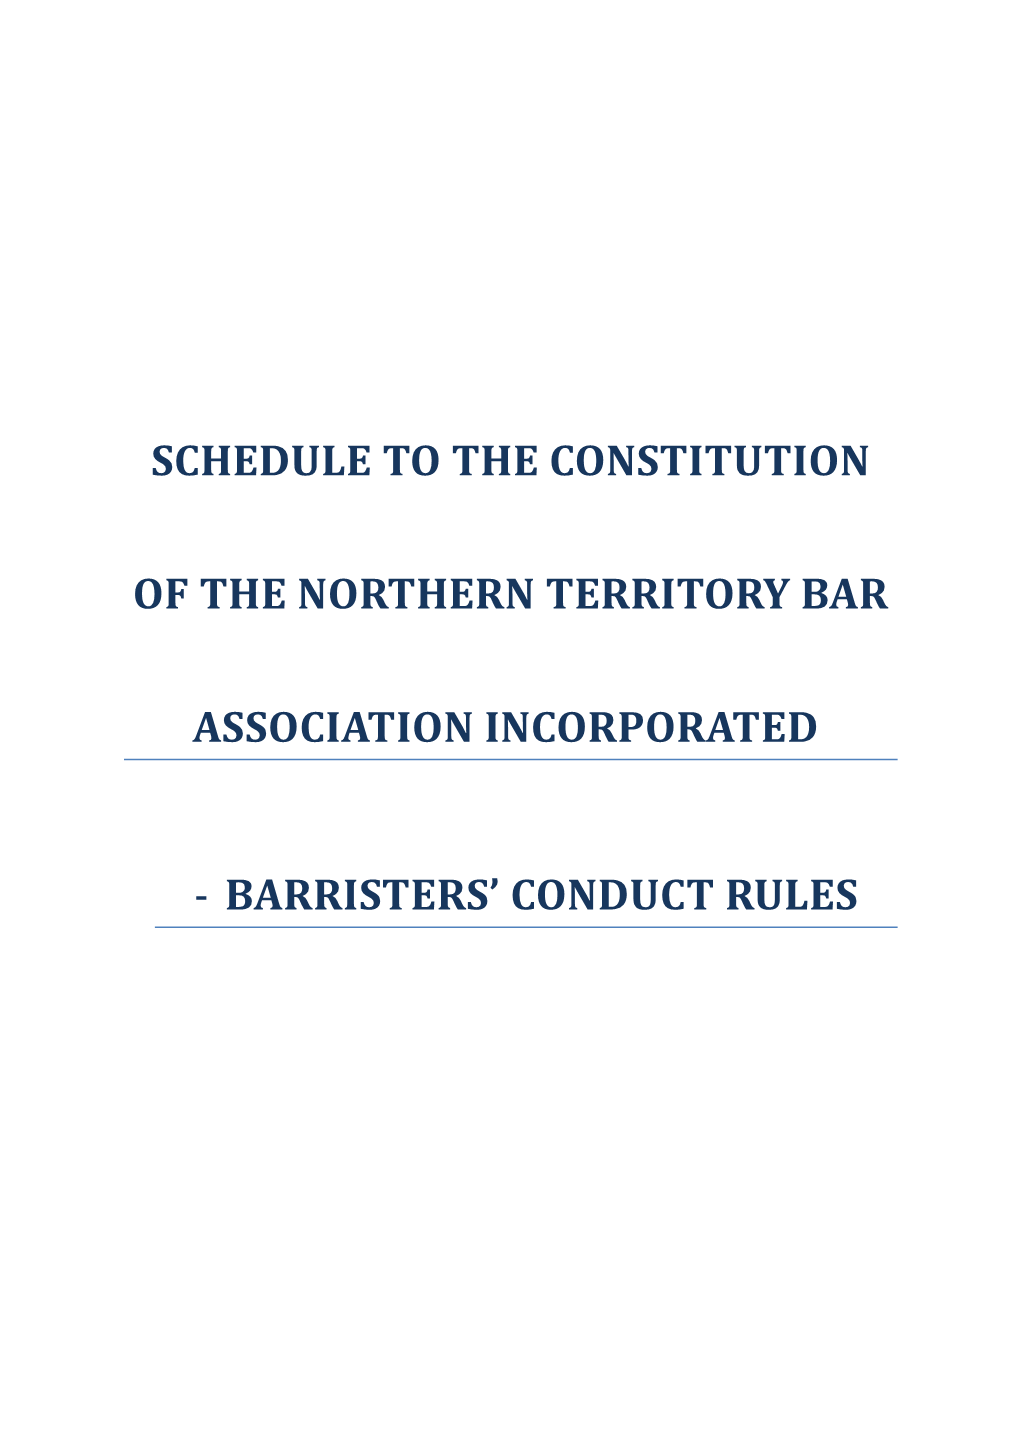 Schedule to the Constitution of the Northern Territory Bar Association Incorporated